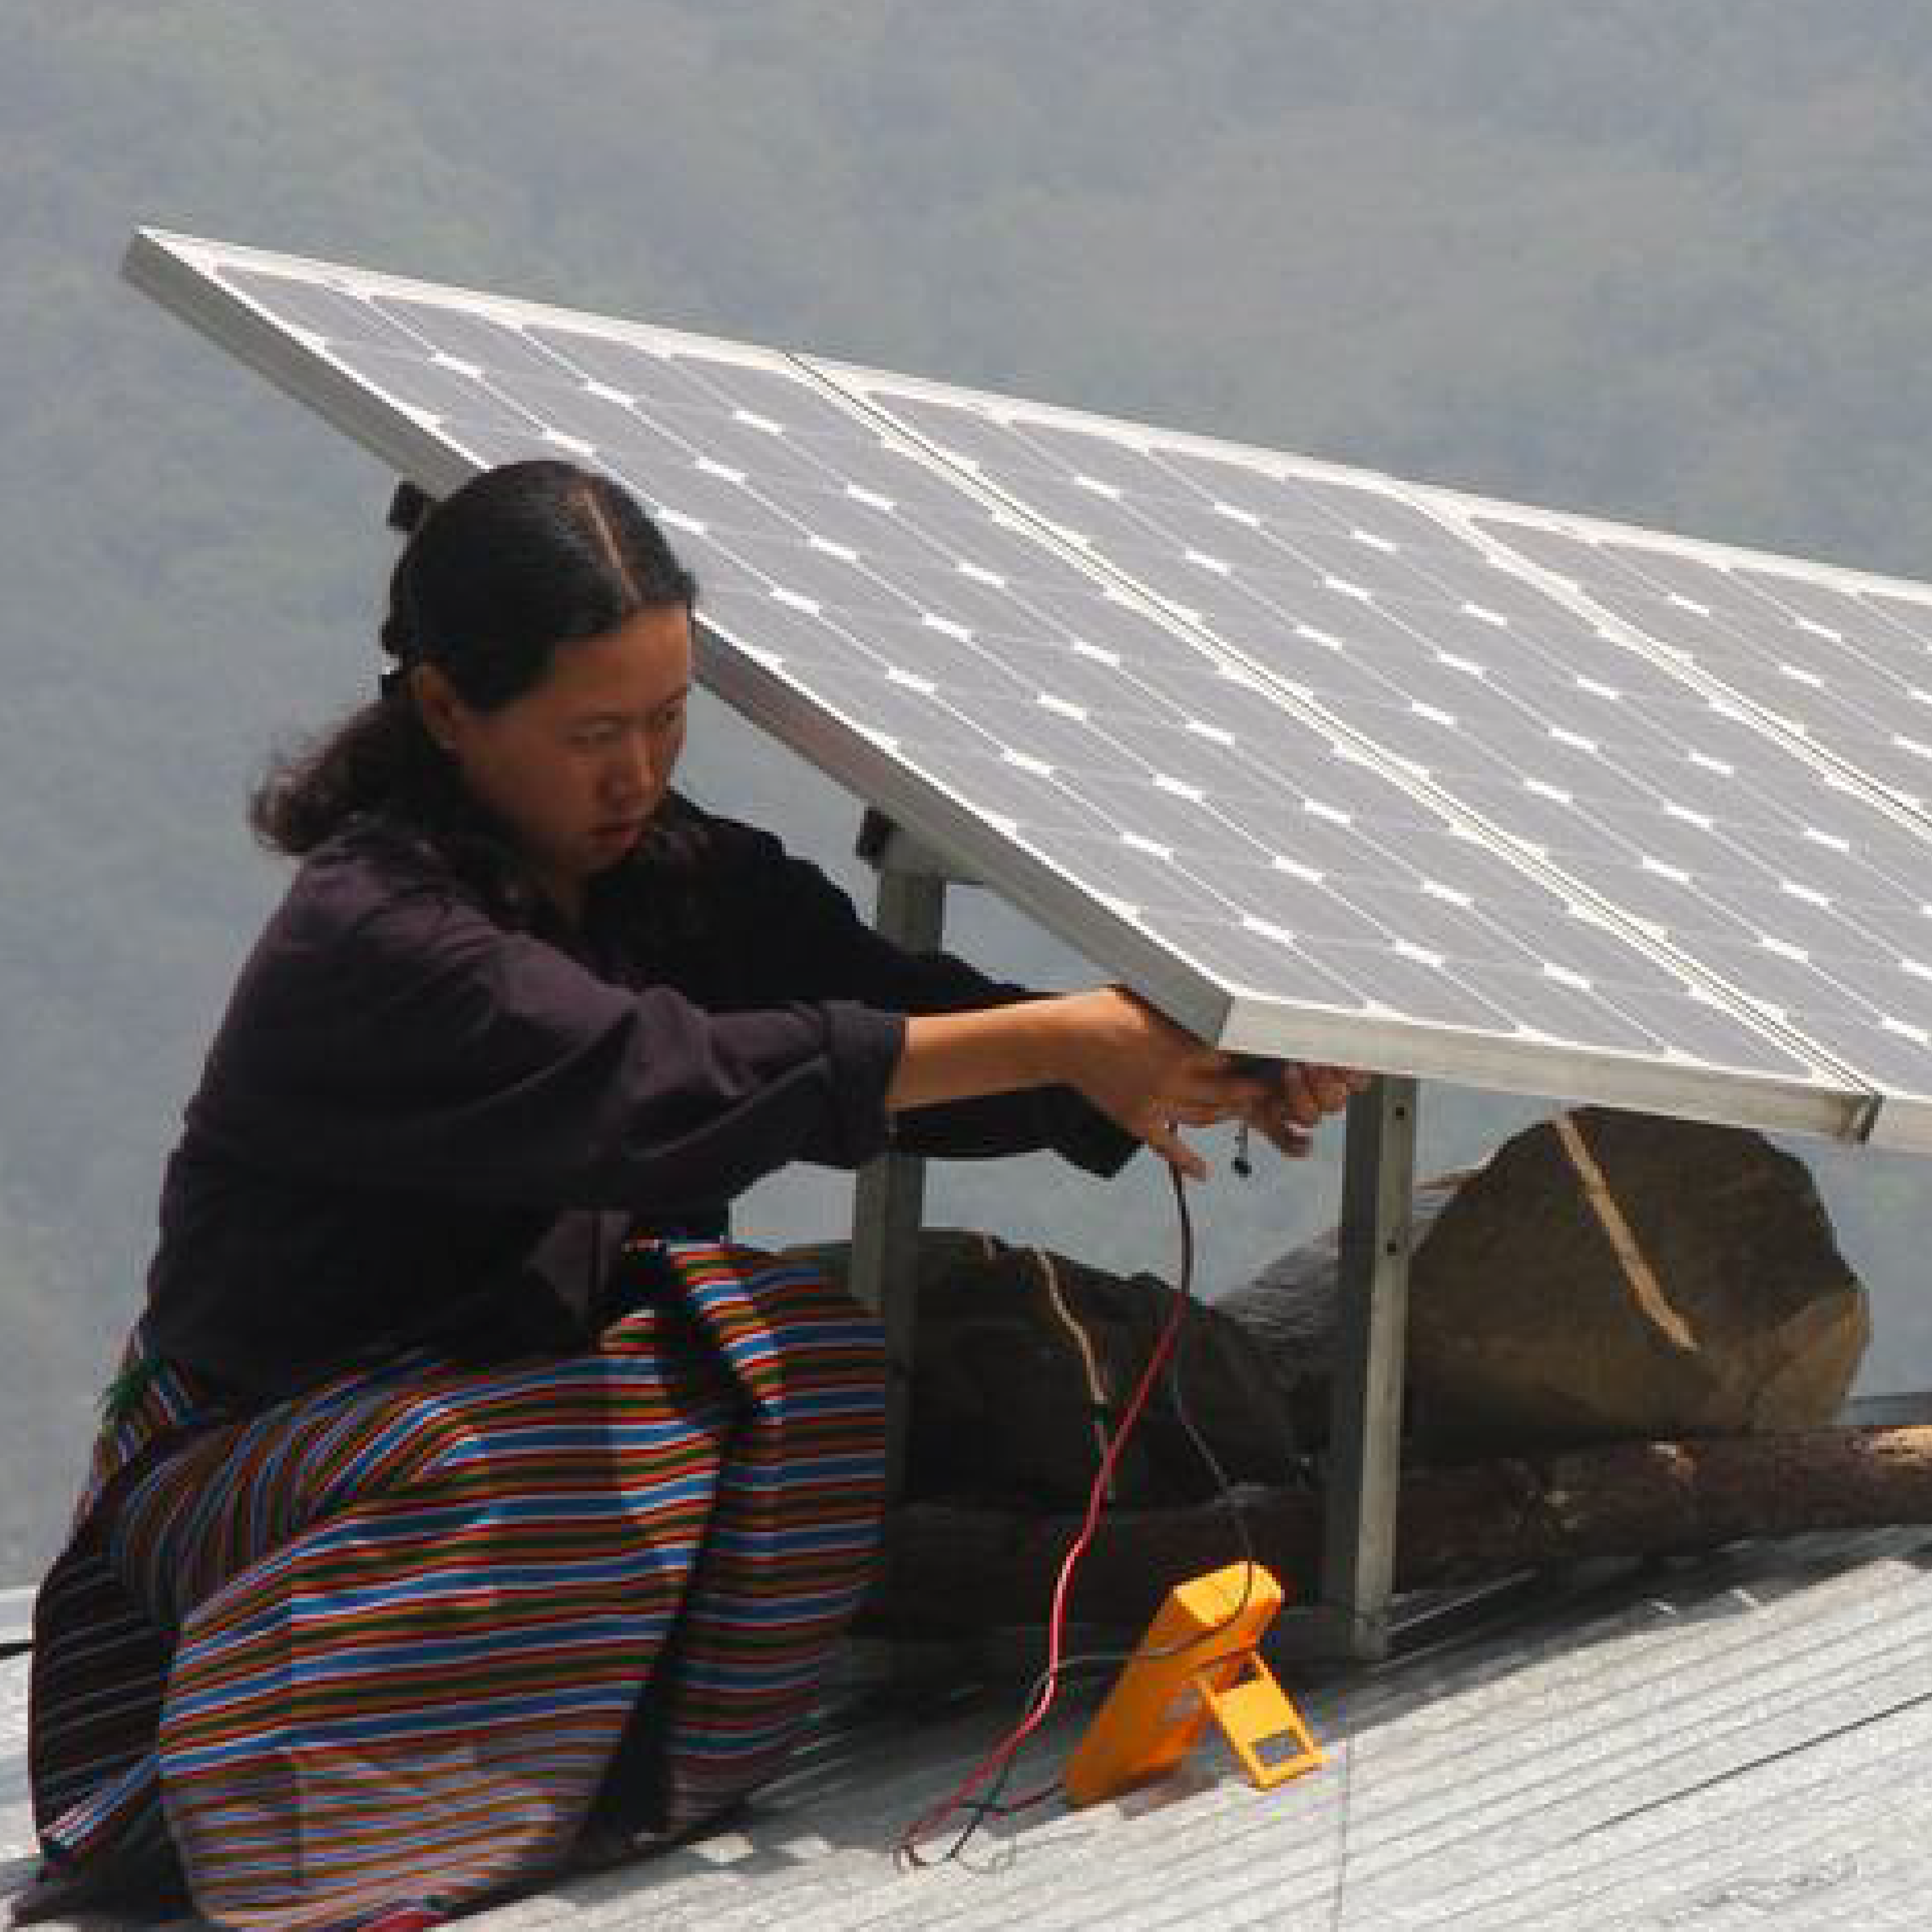 A woman installs a solar panel on a roof in Bhutan.